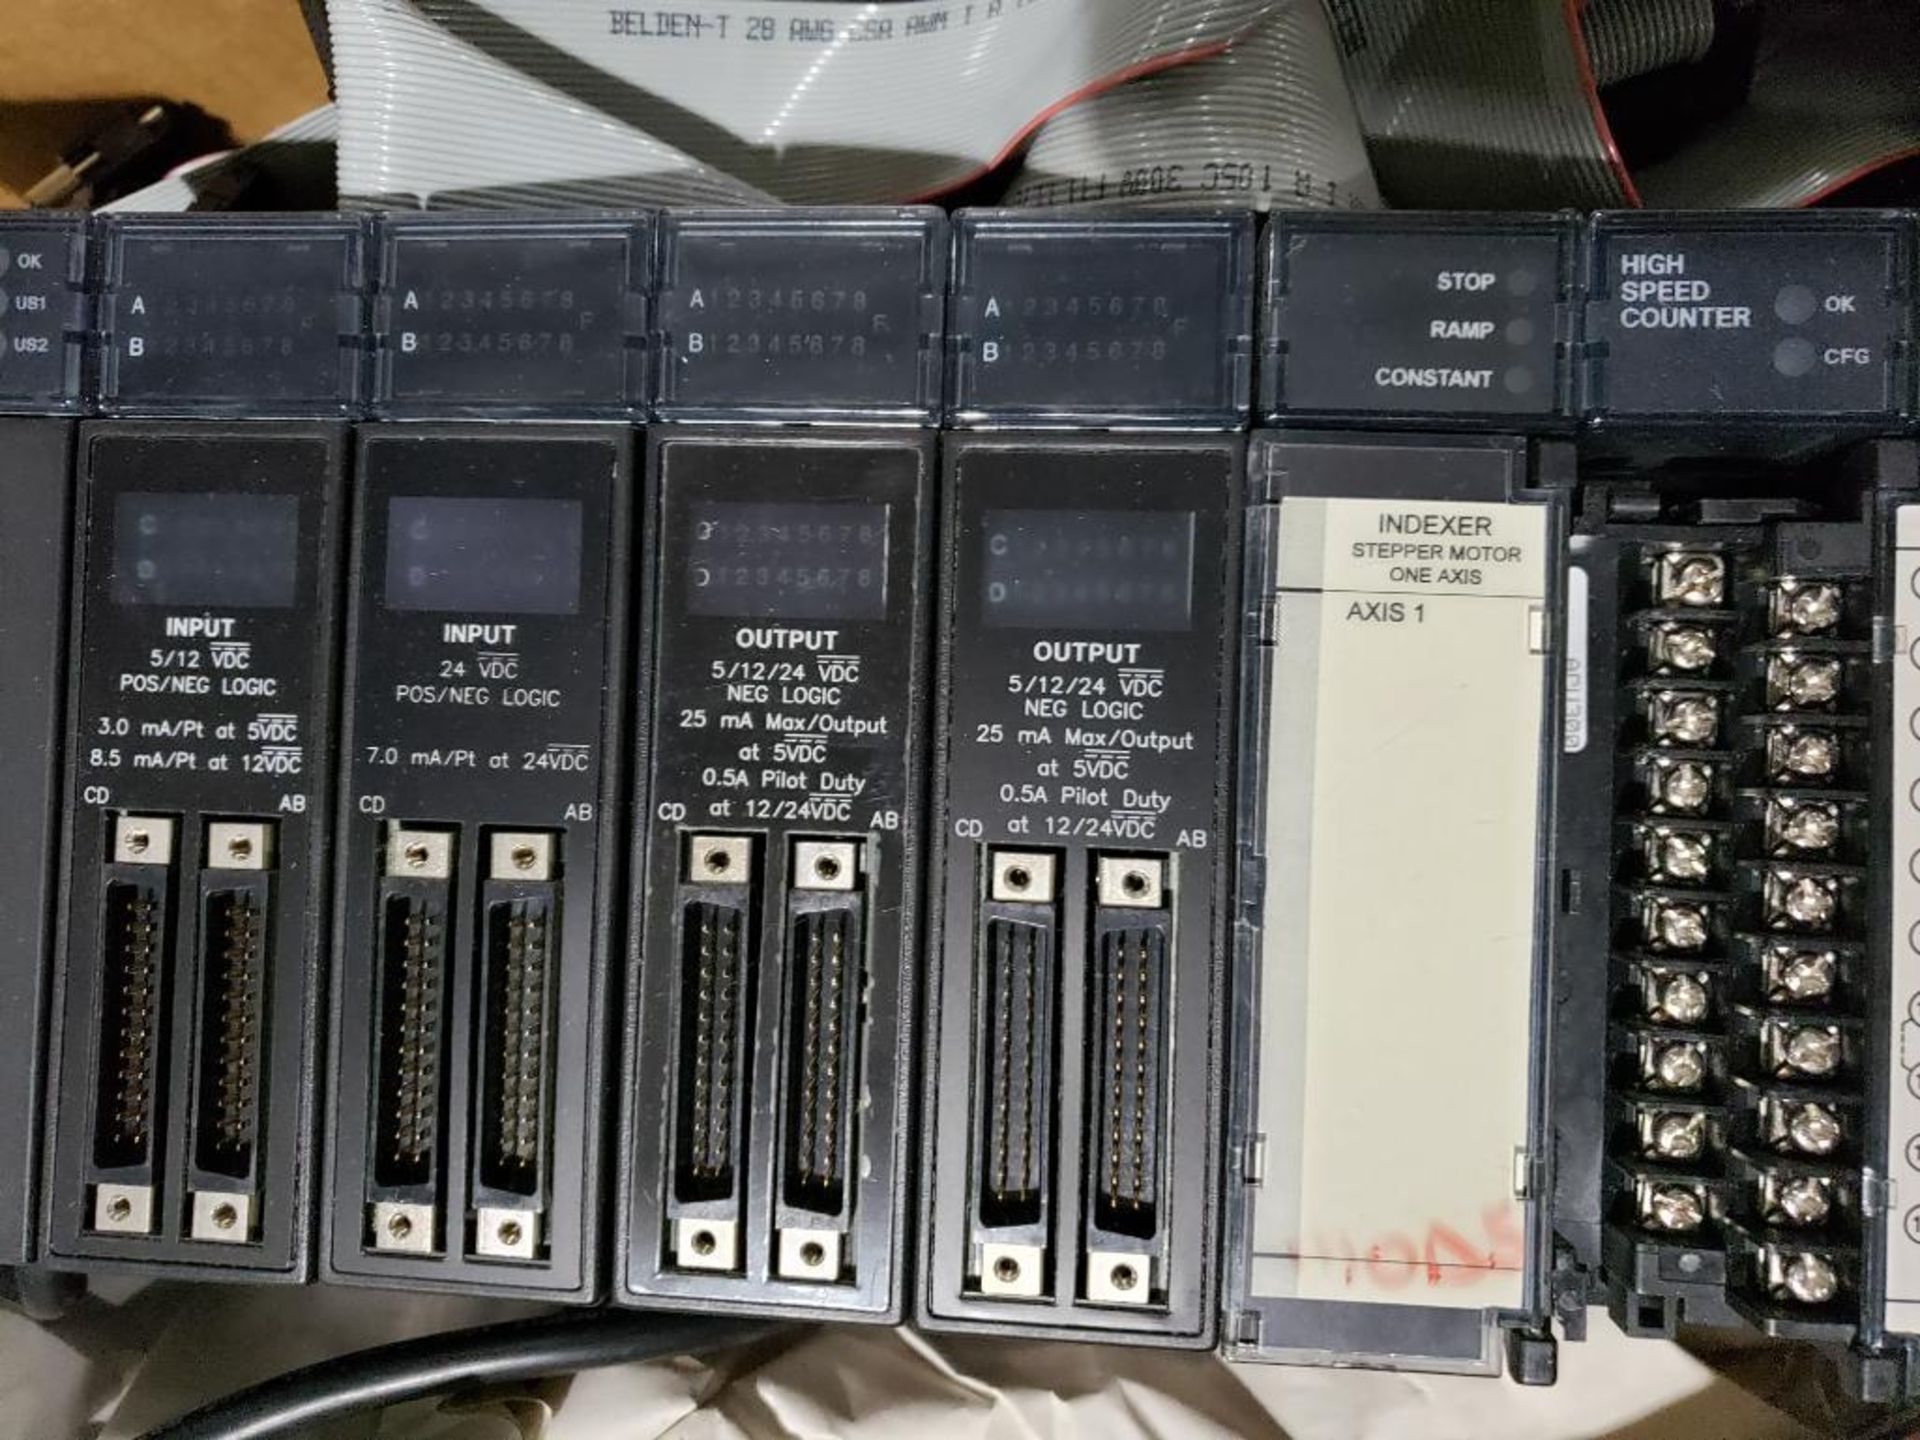 GE Fanuc series 90-30 PLC rack with assorted cards, power supply etc. - Image 4 of 6